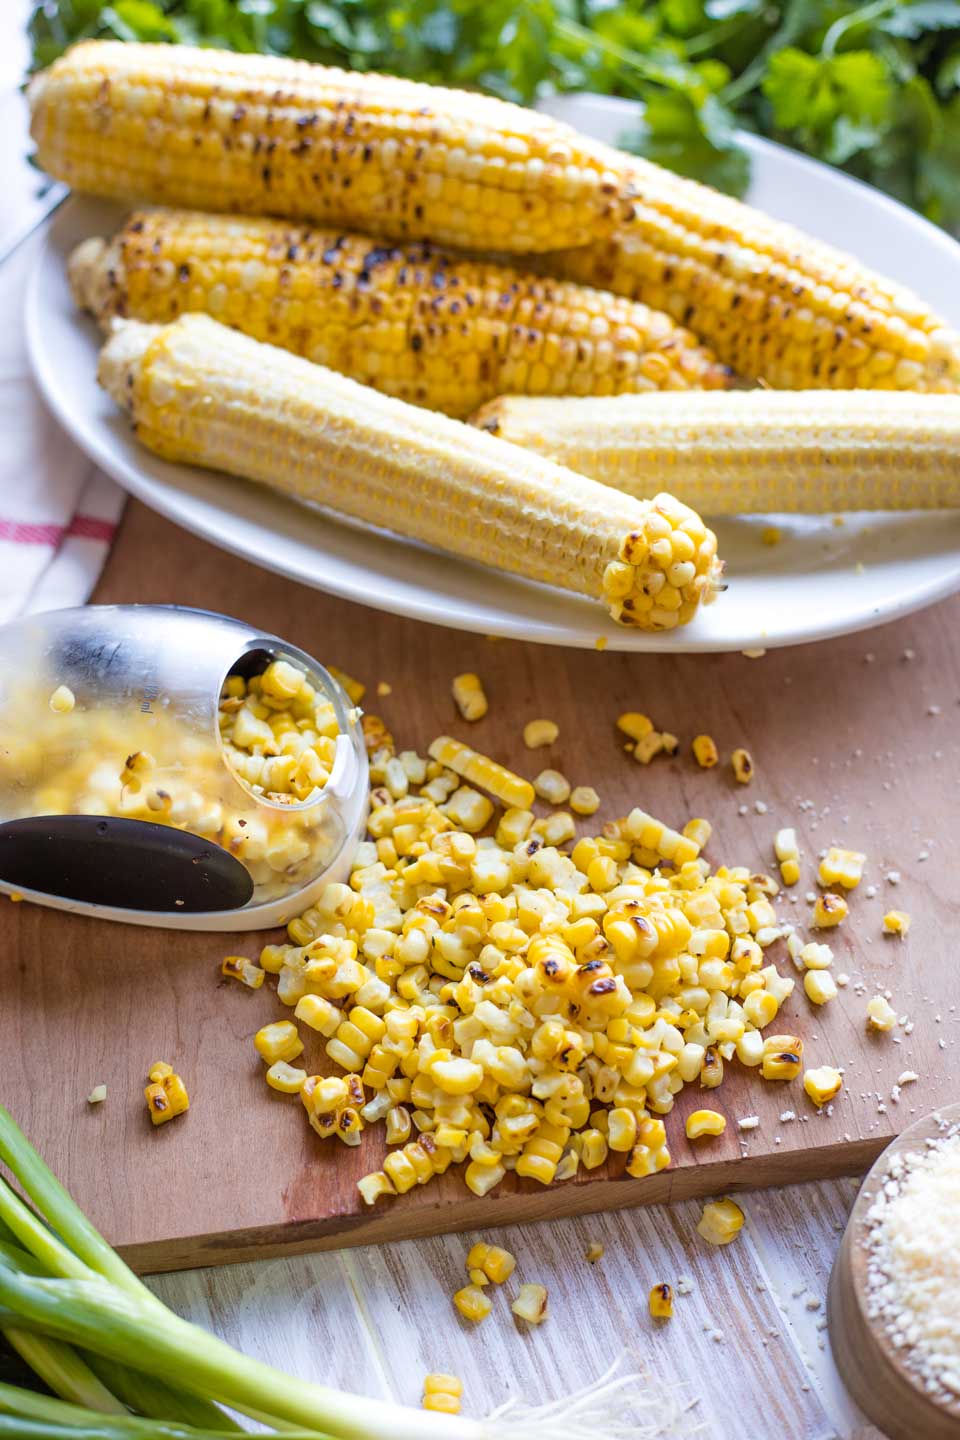 A pile of kernels cut off nearby corn cobs laying on a platter, with a corn stripper and other corn salad ingredients.